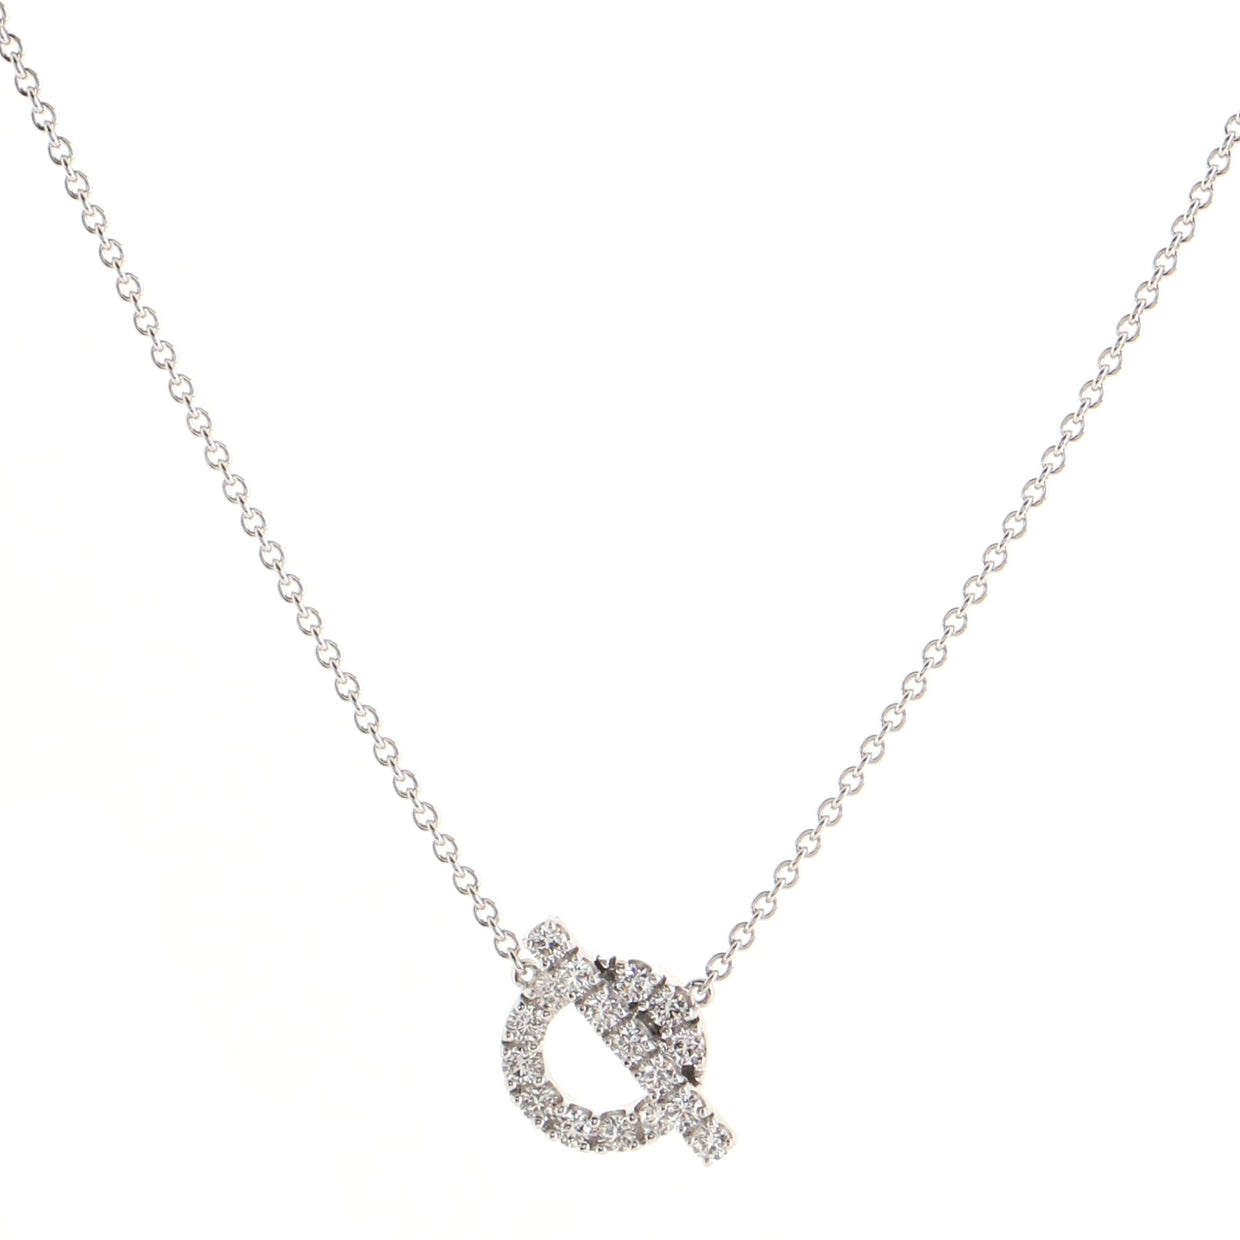 Hermes Finesse Pendant Necklace 18K White Gold and Diamonds White gold